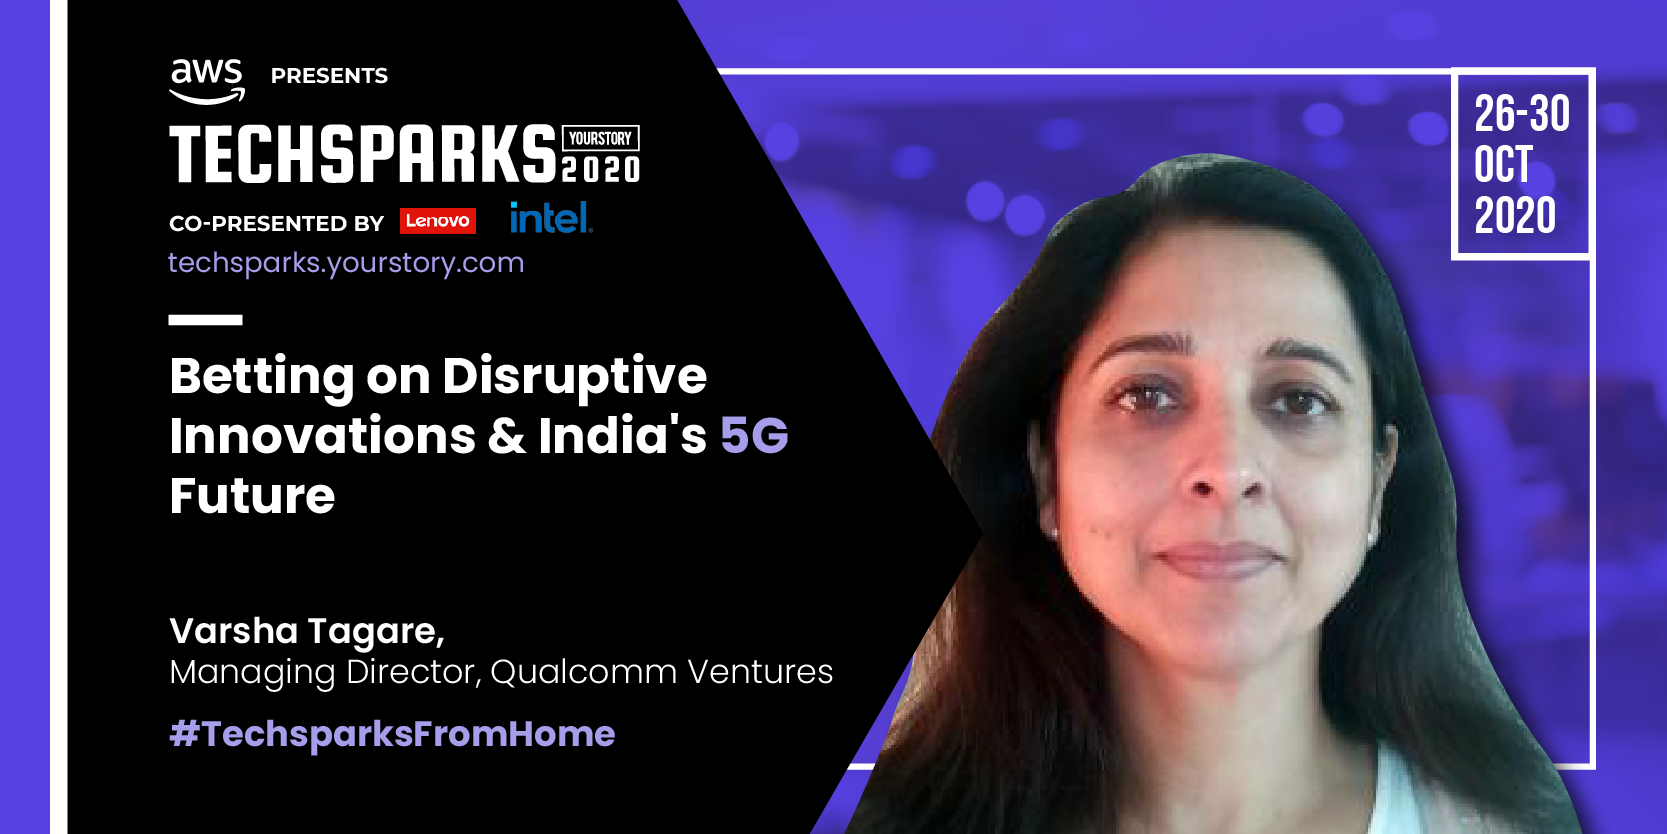 [TechSparks 2020] Launch of 5G will open up opportunities for new services, says Qualcomm Ventures MD Varsha Tagare